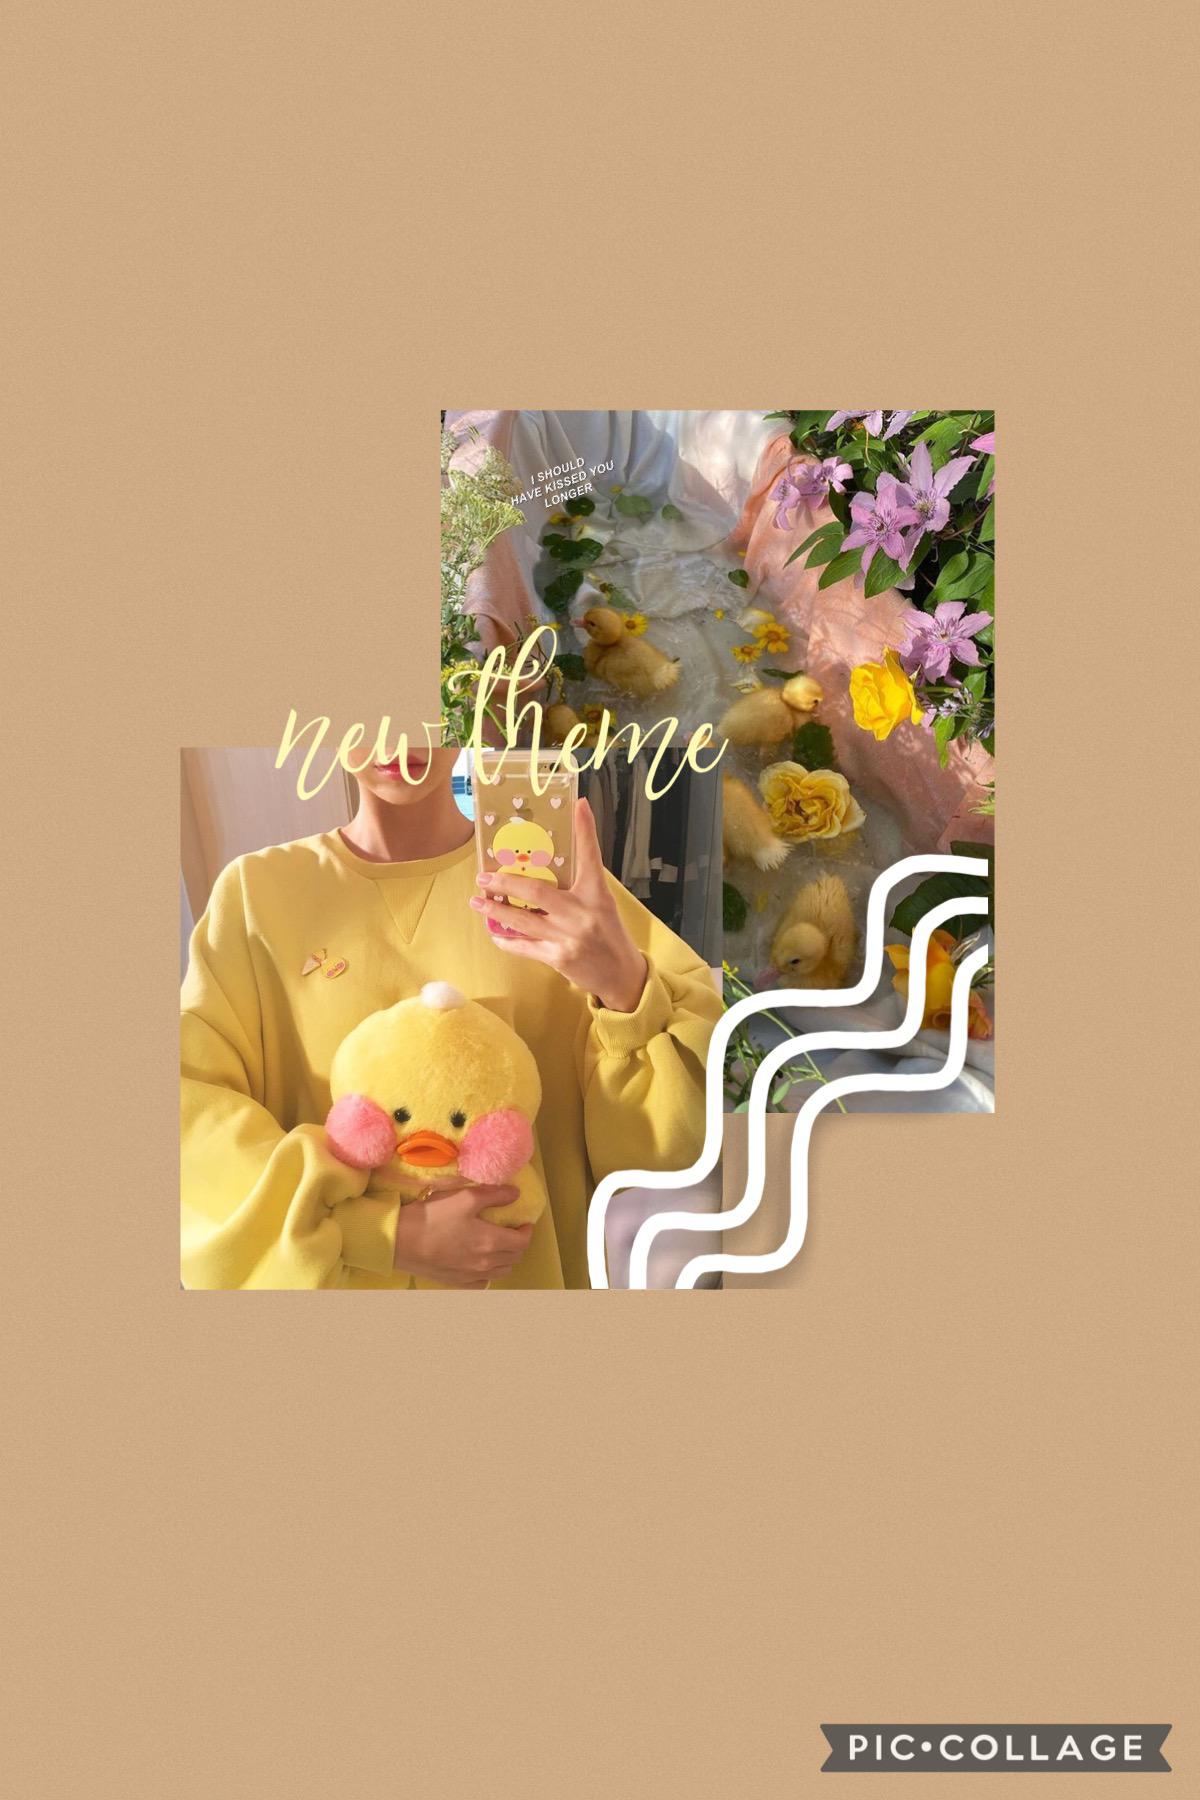 💍tap!💍
im doing a new random theme, not rlly related to ducks but im gonna be very free. this theme is just gonna be abt my feelings at the time i make them.